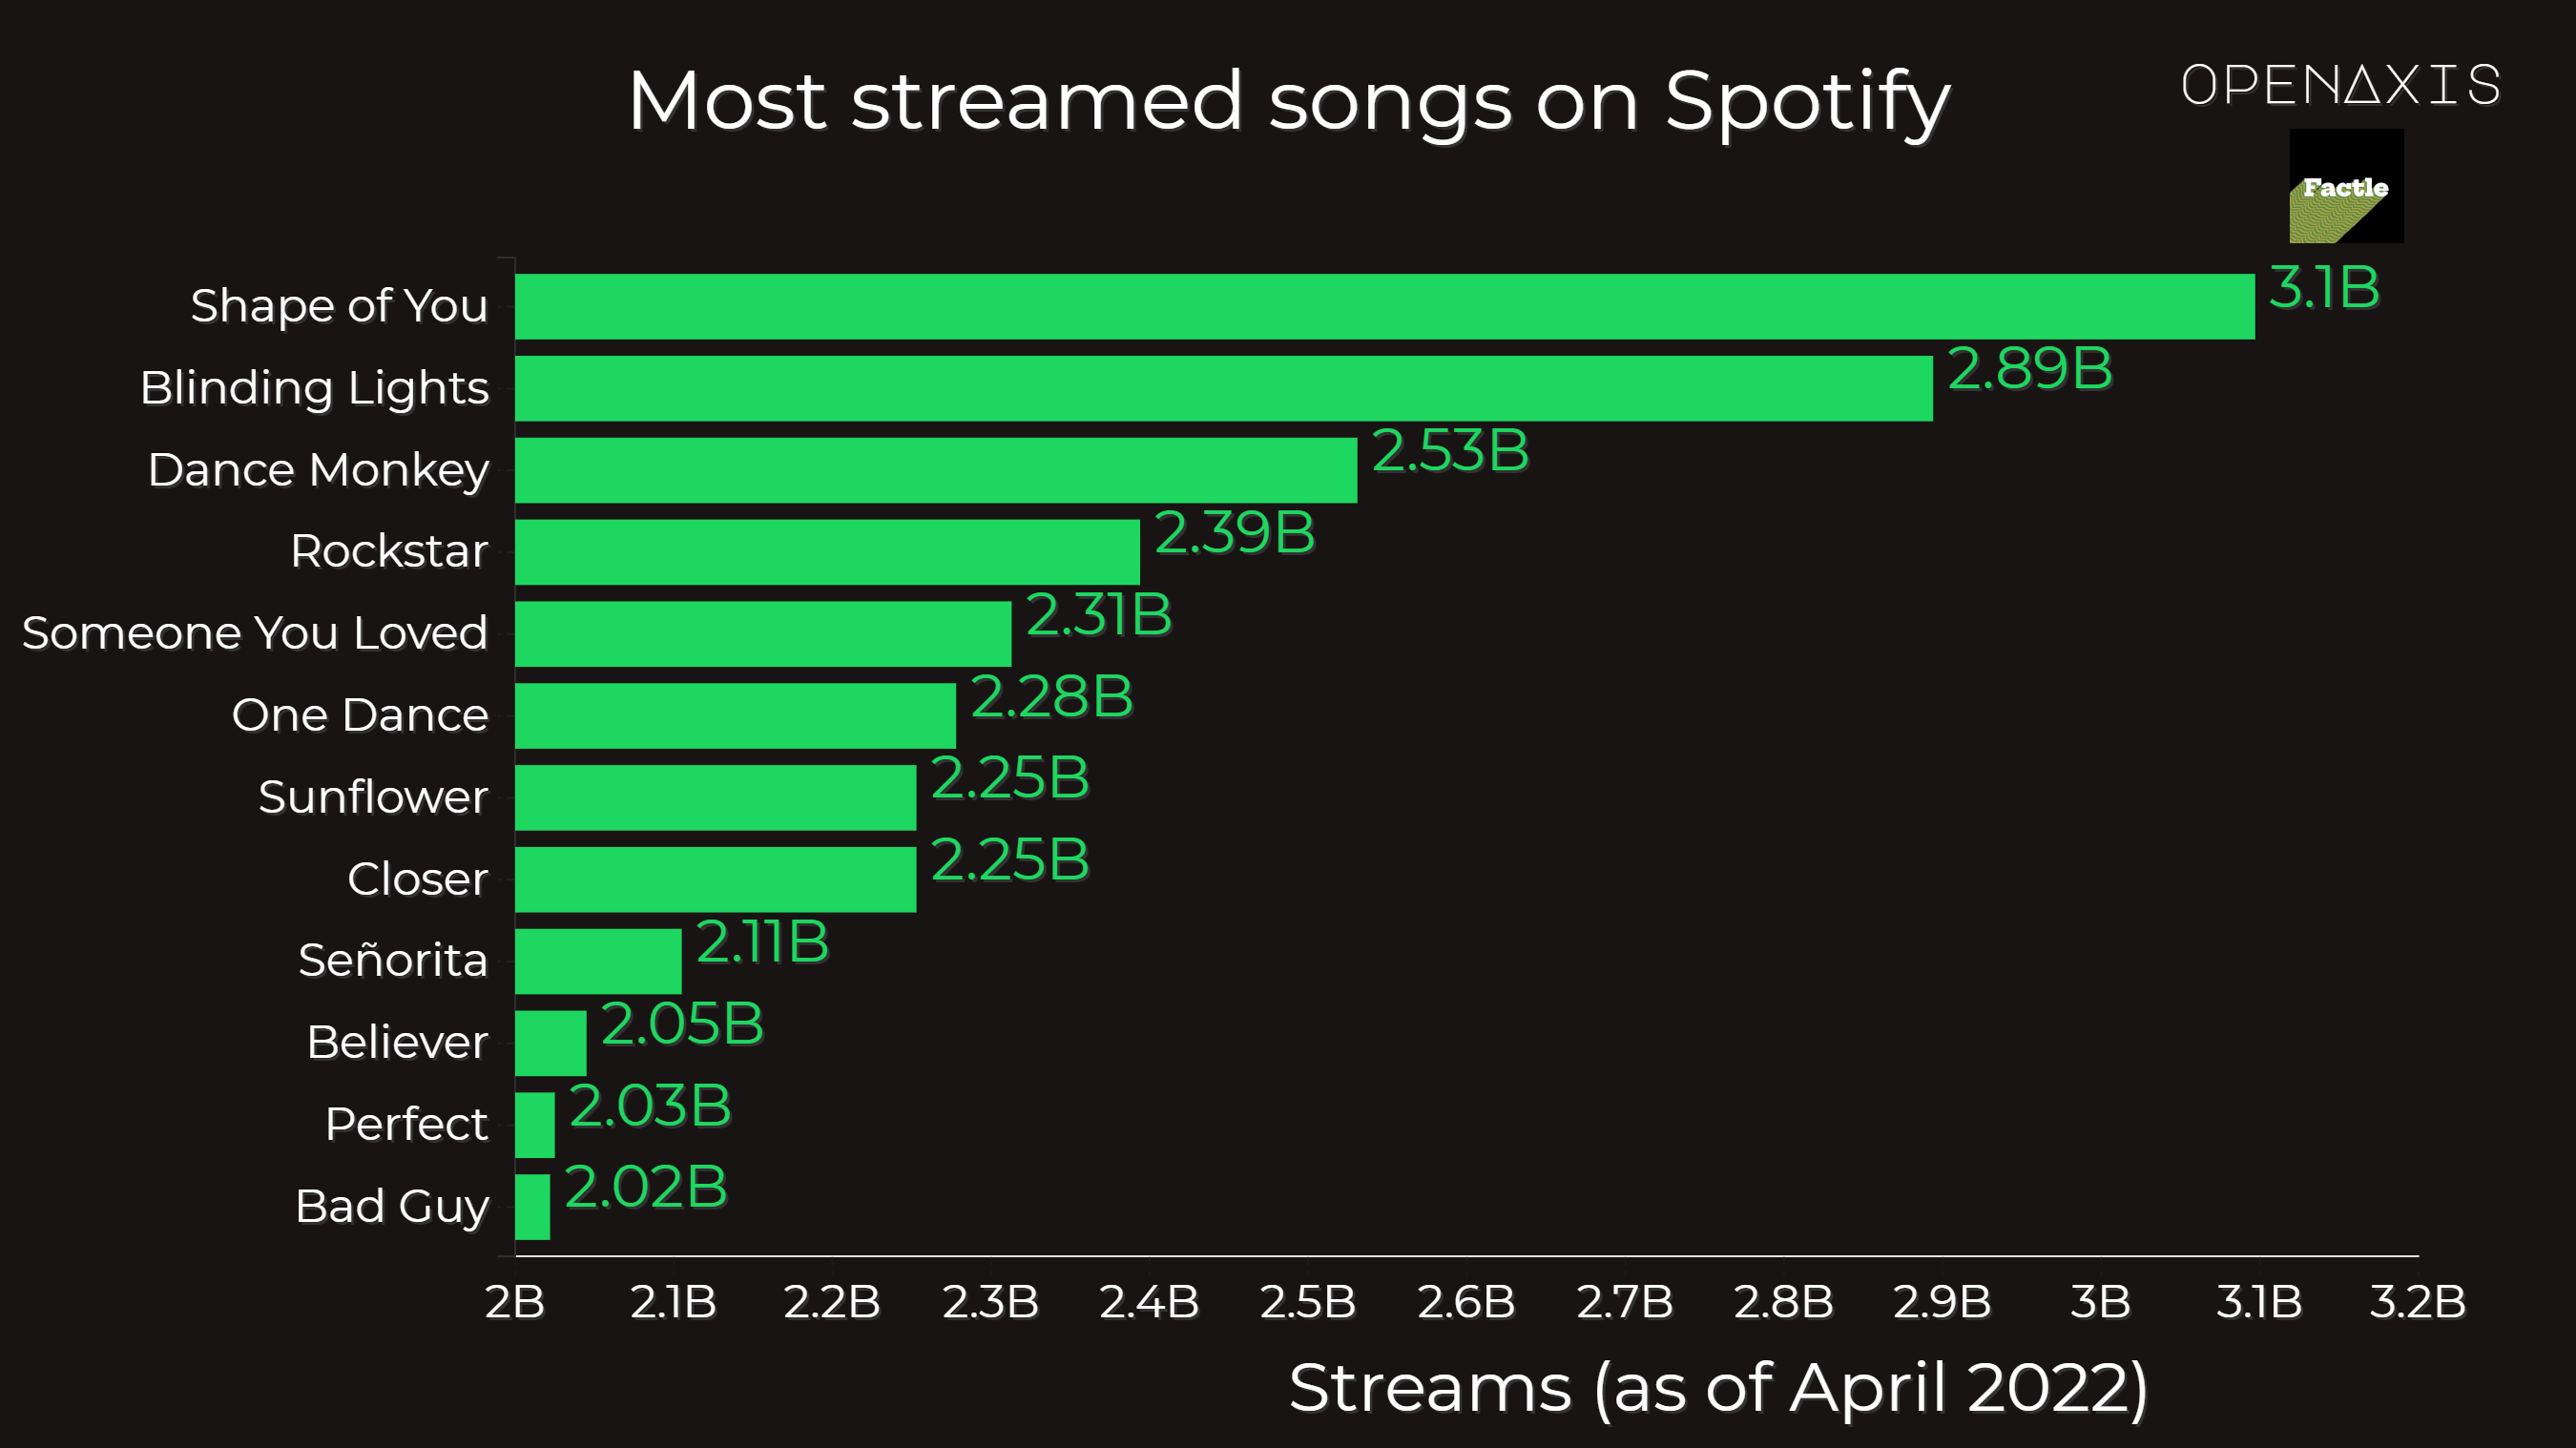 <p><a href="https://app.openaxis.com/data/3614" target="_blank">View full top 100 song dataset</a></p><p>As of April 2022, all of the top 100 songs have exceeded 1.3 billion streams, of which 12 have reached 2 billion streams, with Ed Sheeran's "Shape of You" ranked in the top position, as the only song that exceeds 3 billion streams.</p><p>Justin Bieber and Post Malone have the most songs in the top 100 with 6 entries each.</p><p>﻿<a href="/search?q=%23music" target="_blank">#music</a>﻿ ﻿<a href="/search?q=%23trivia" target="_blank">#trivia</a>﻿ ﻿<a href="/search?q=%23factle" target="_blank">#factle</a>﻿ ﻿<a href="/search?q=%23top5" target="_blank">#top5</a>﻿ </p><p>Source: <a href="/data/3614" target="_blank">Wikipedia</a></p>